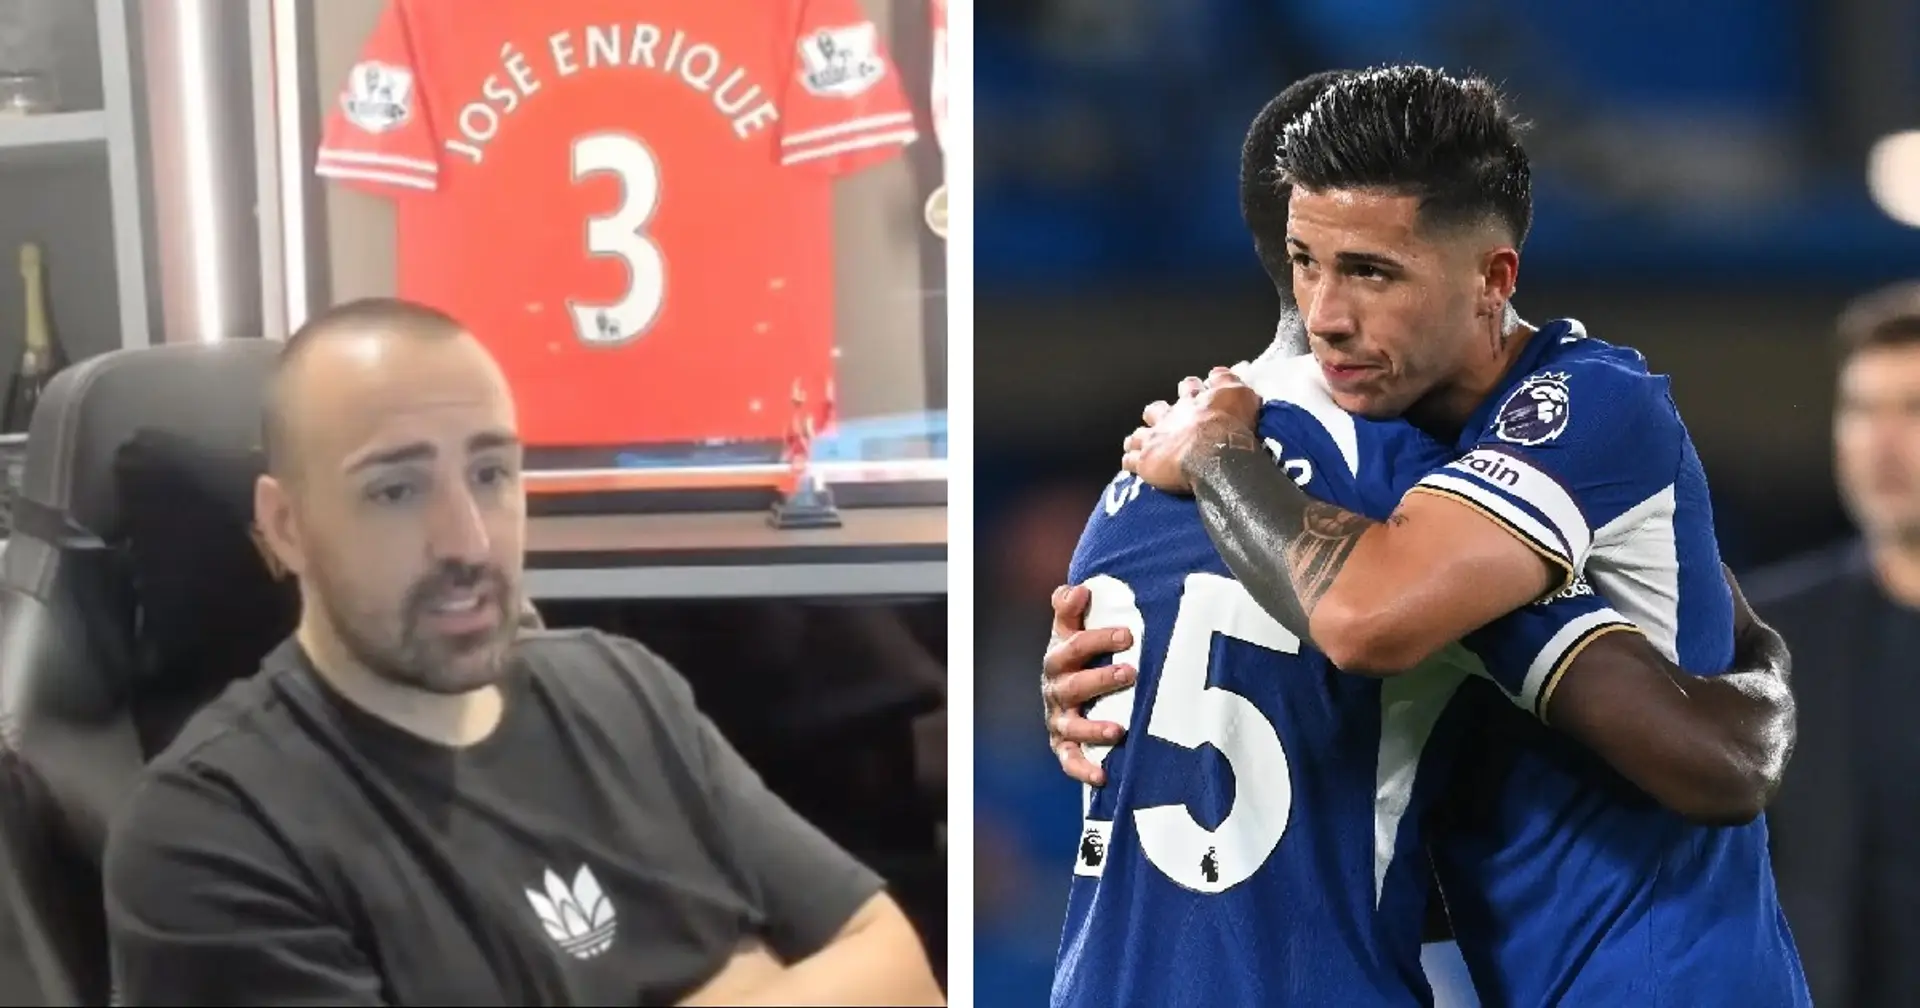 'I would’ve loved it': Jose Enrique names one Chelsea player he wishes Liverpool had signed